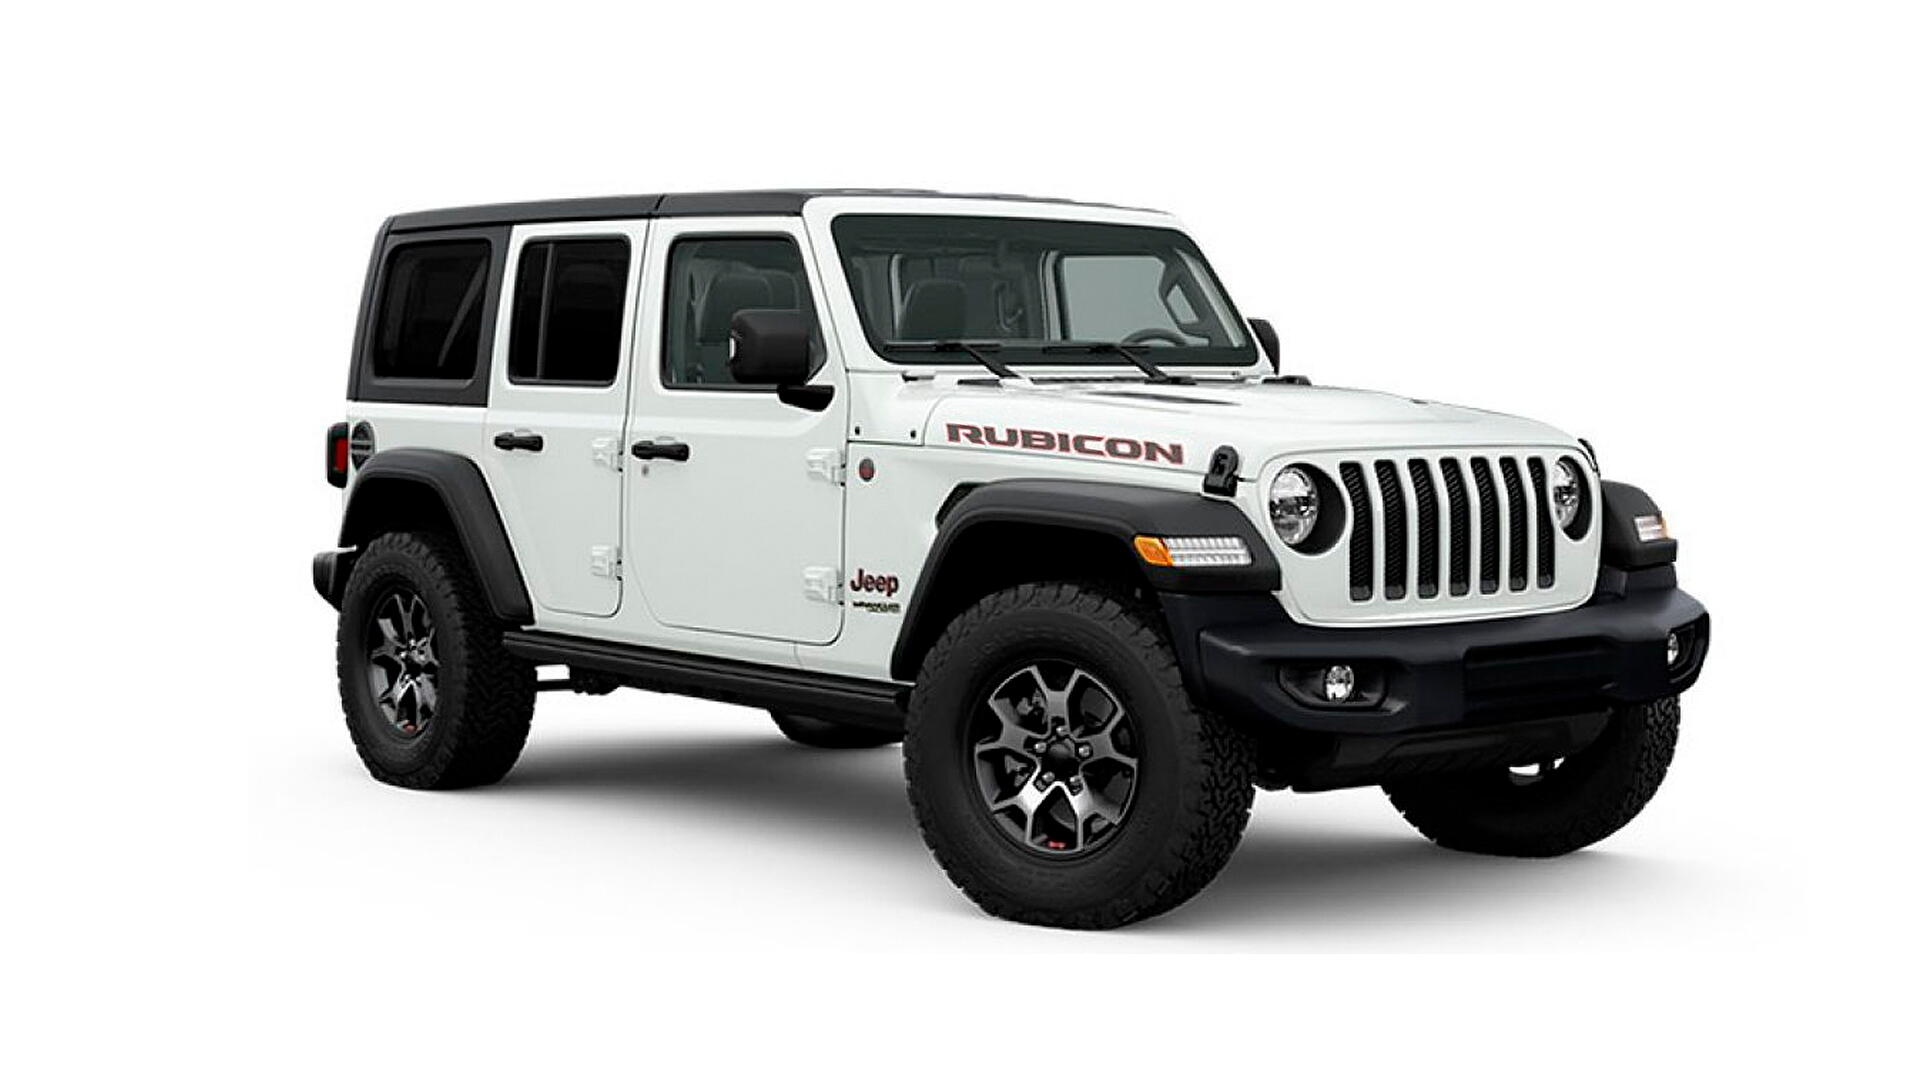 Jeep Wrangler Images